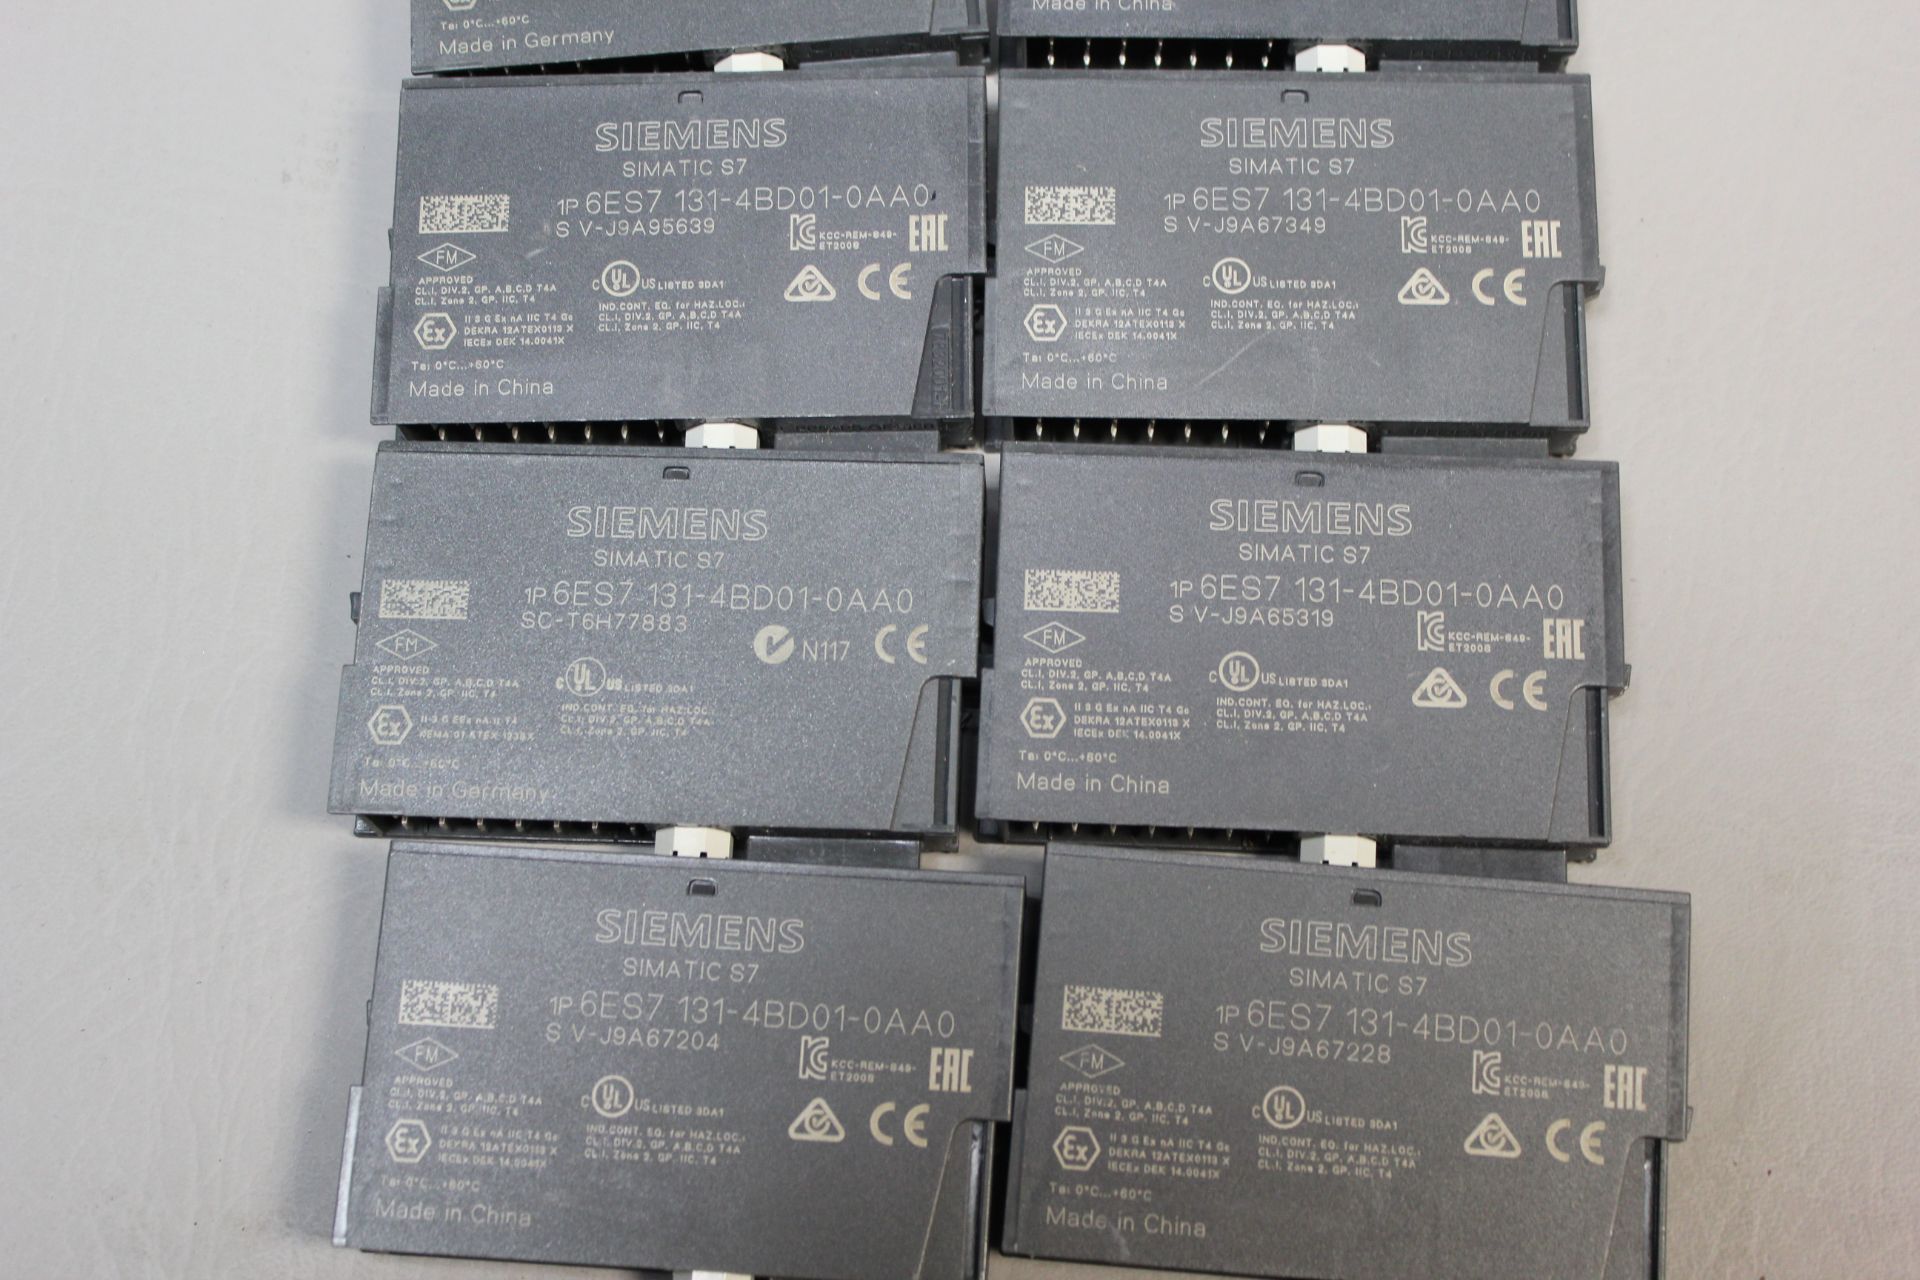 LOT OF SIEMENS SIMATIC S7 DIGITAL ELECTRONIC MODULES - Image 5 of 6